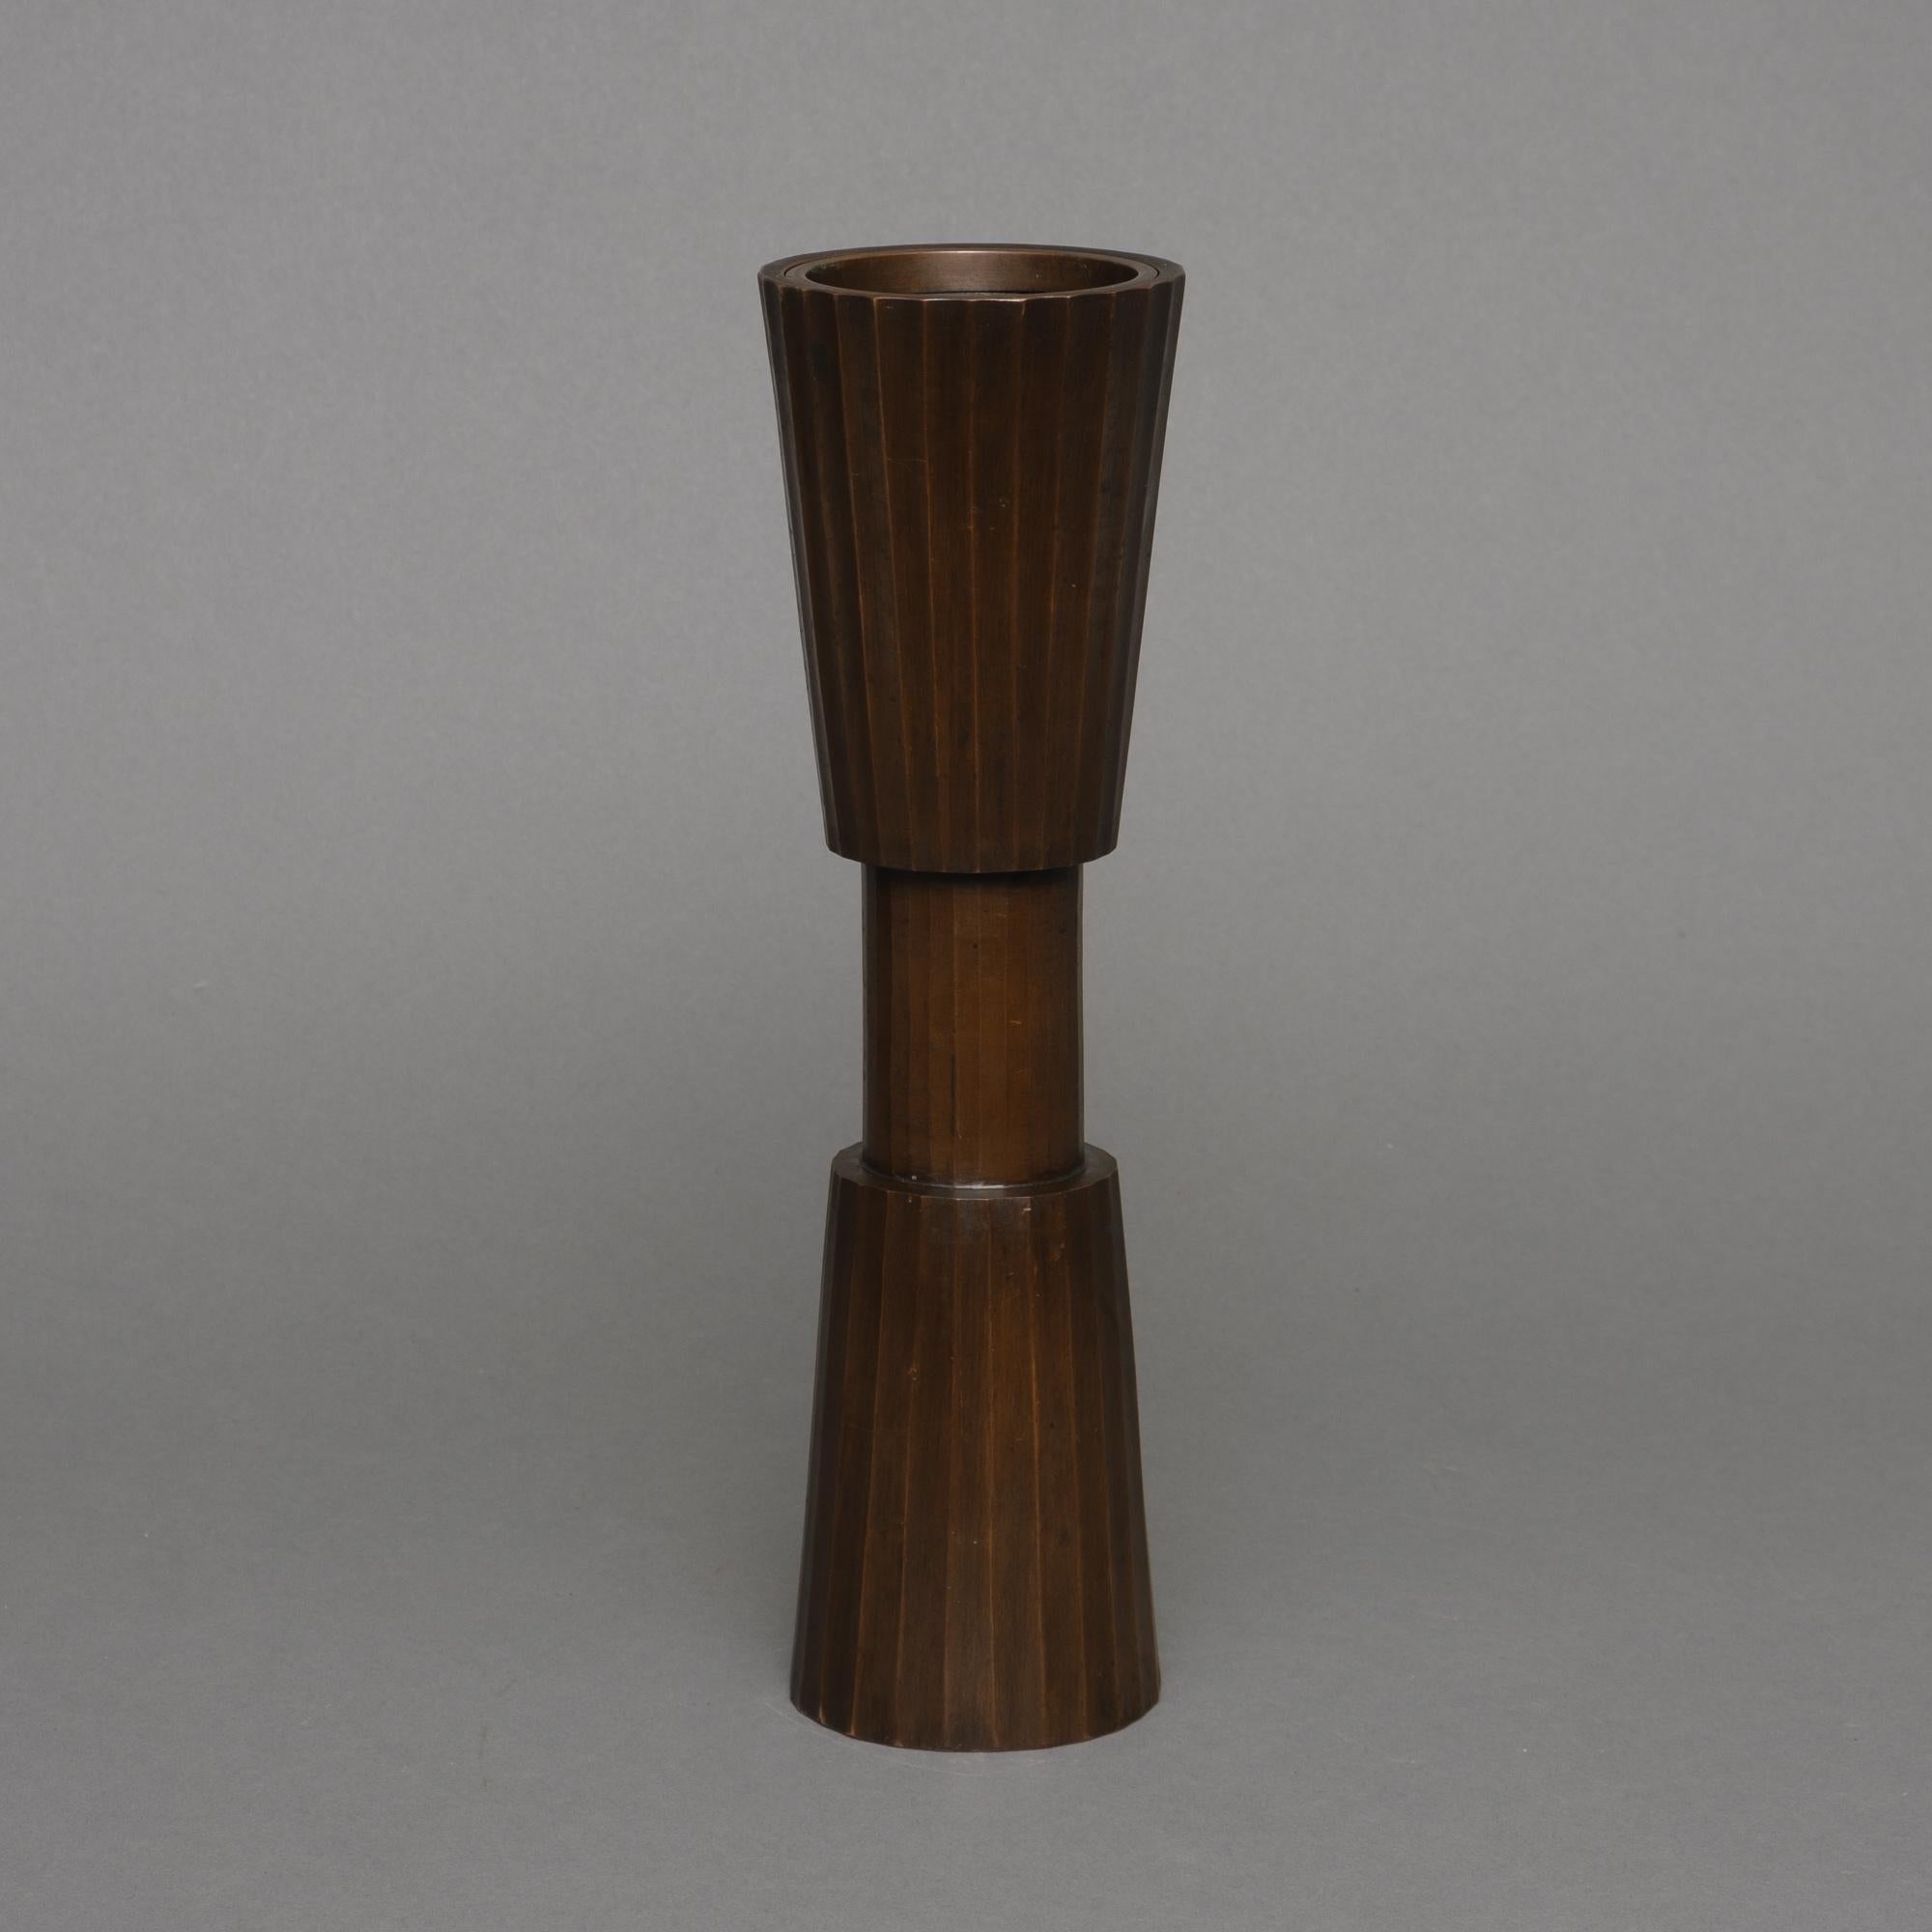 20th Century Japanese Patinated Bronze Vase in an Hourglass-Shape with Vertical Ribs